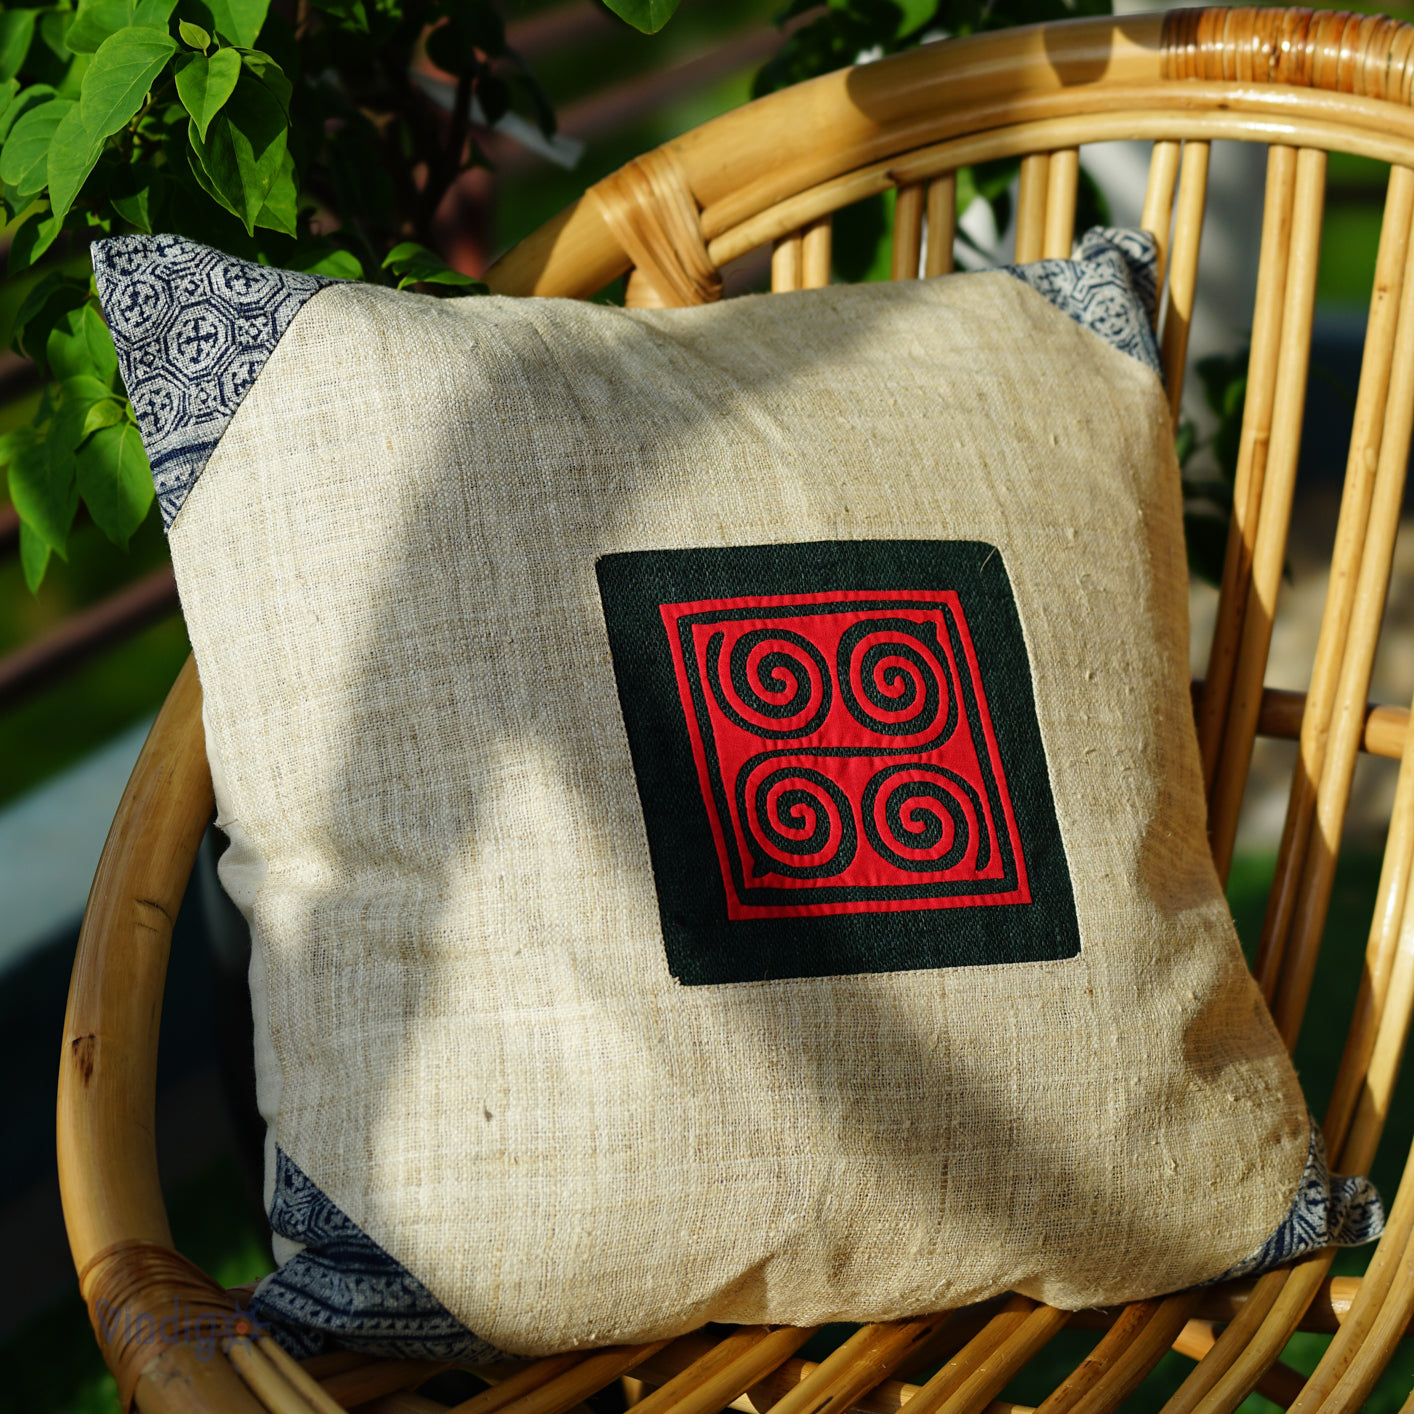 White Hemp Cushion Cover, beeswax batik at corner, red hand-embroidered patch